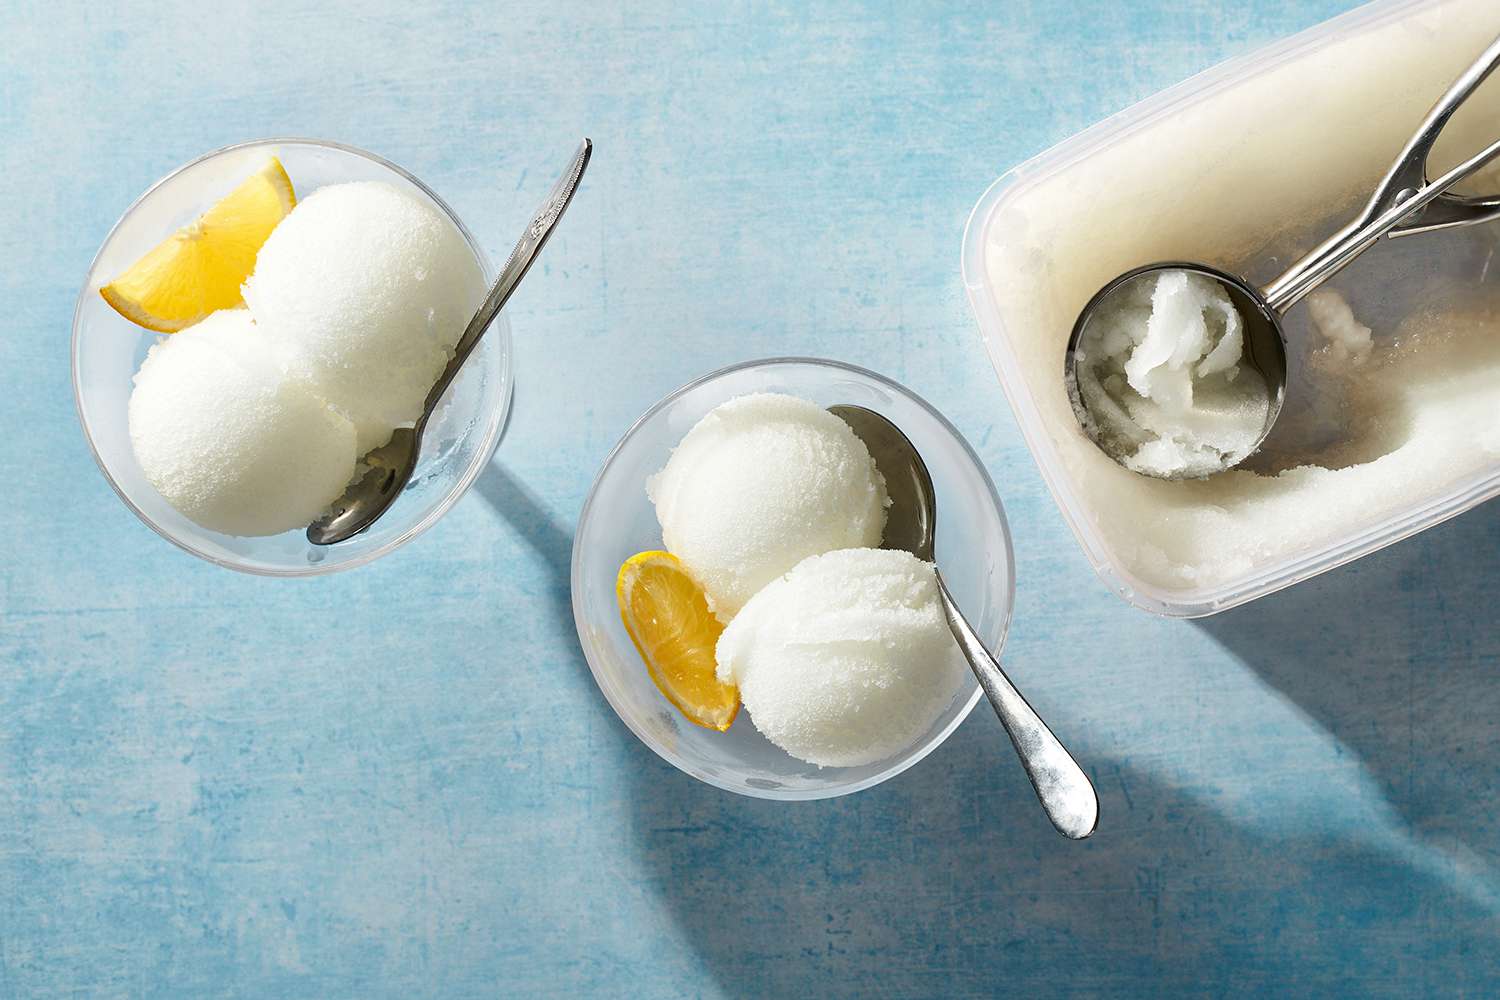 How To Make Lemon Sorbet Without An Ice Cream Maker